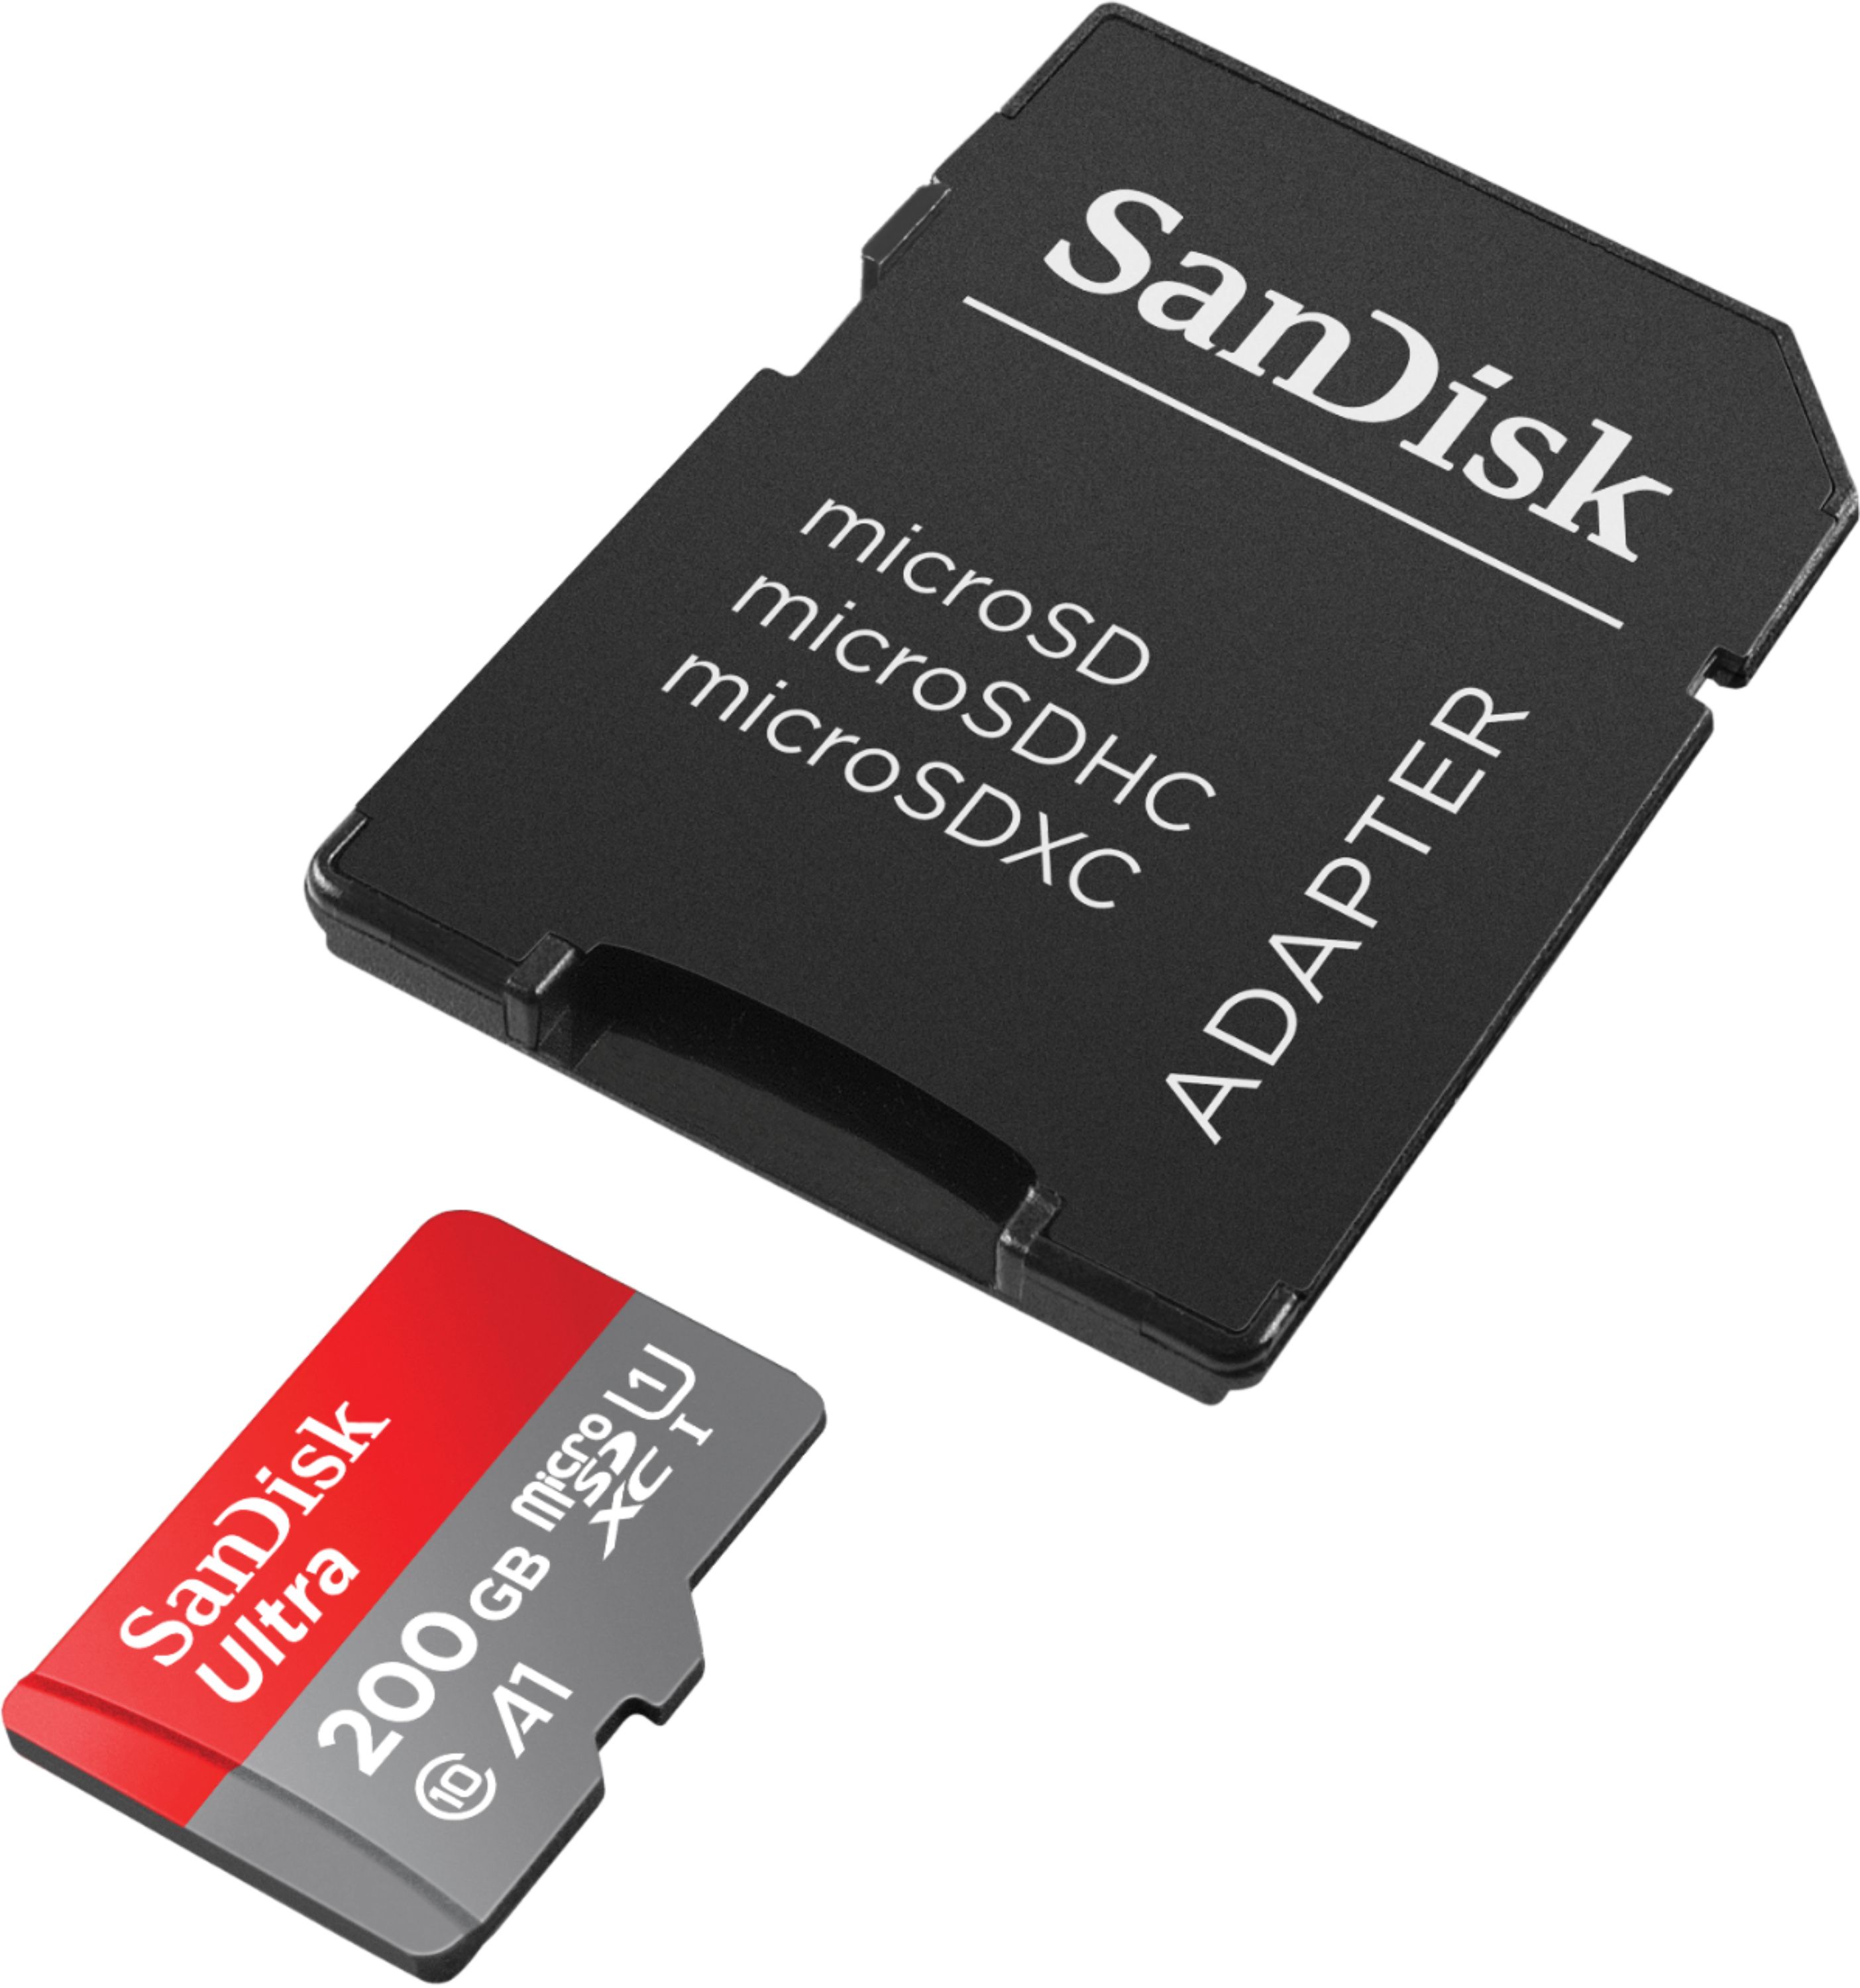 100MBs A1 U1 C10 Works with SanDisk SanDisk Ultra 200GB MicroSDXC Verified for Alcatel 3041G by SanFlash